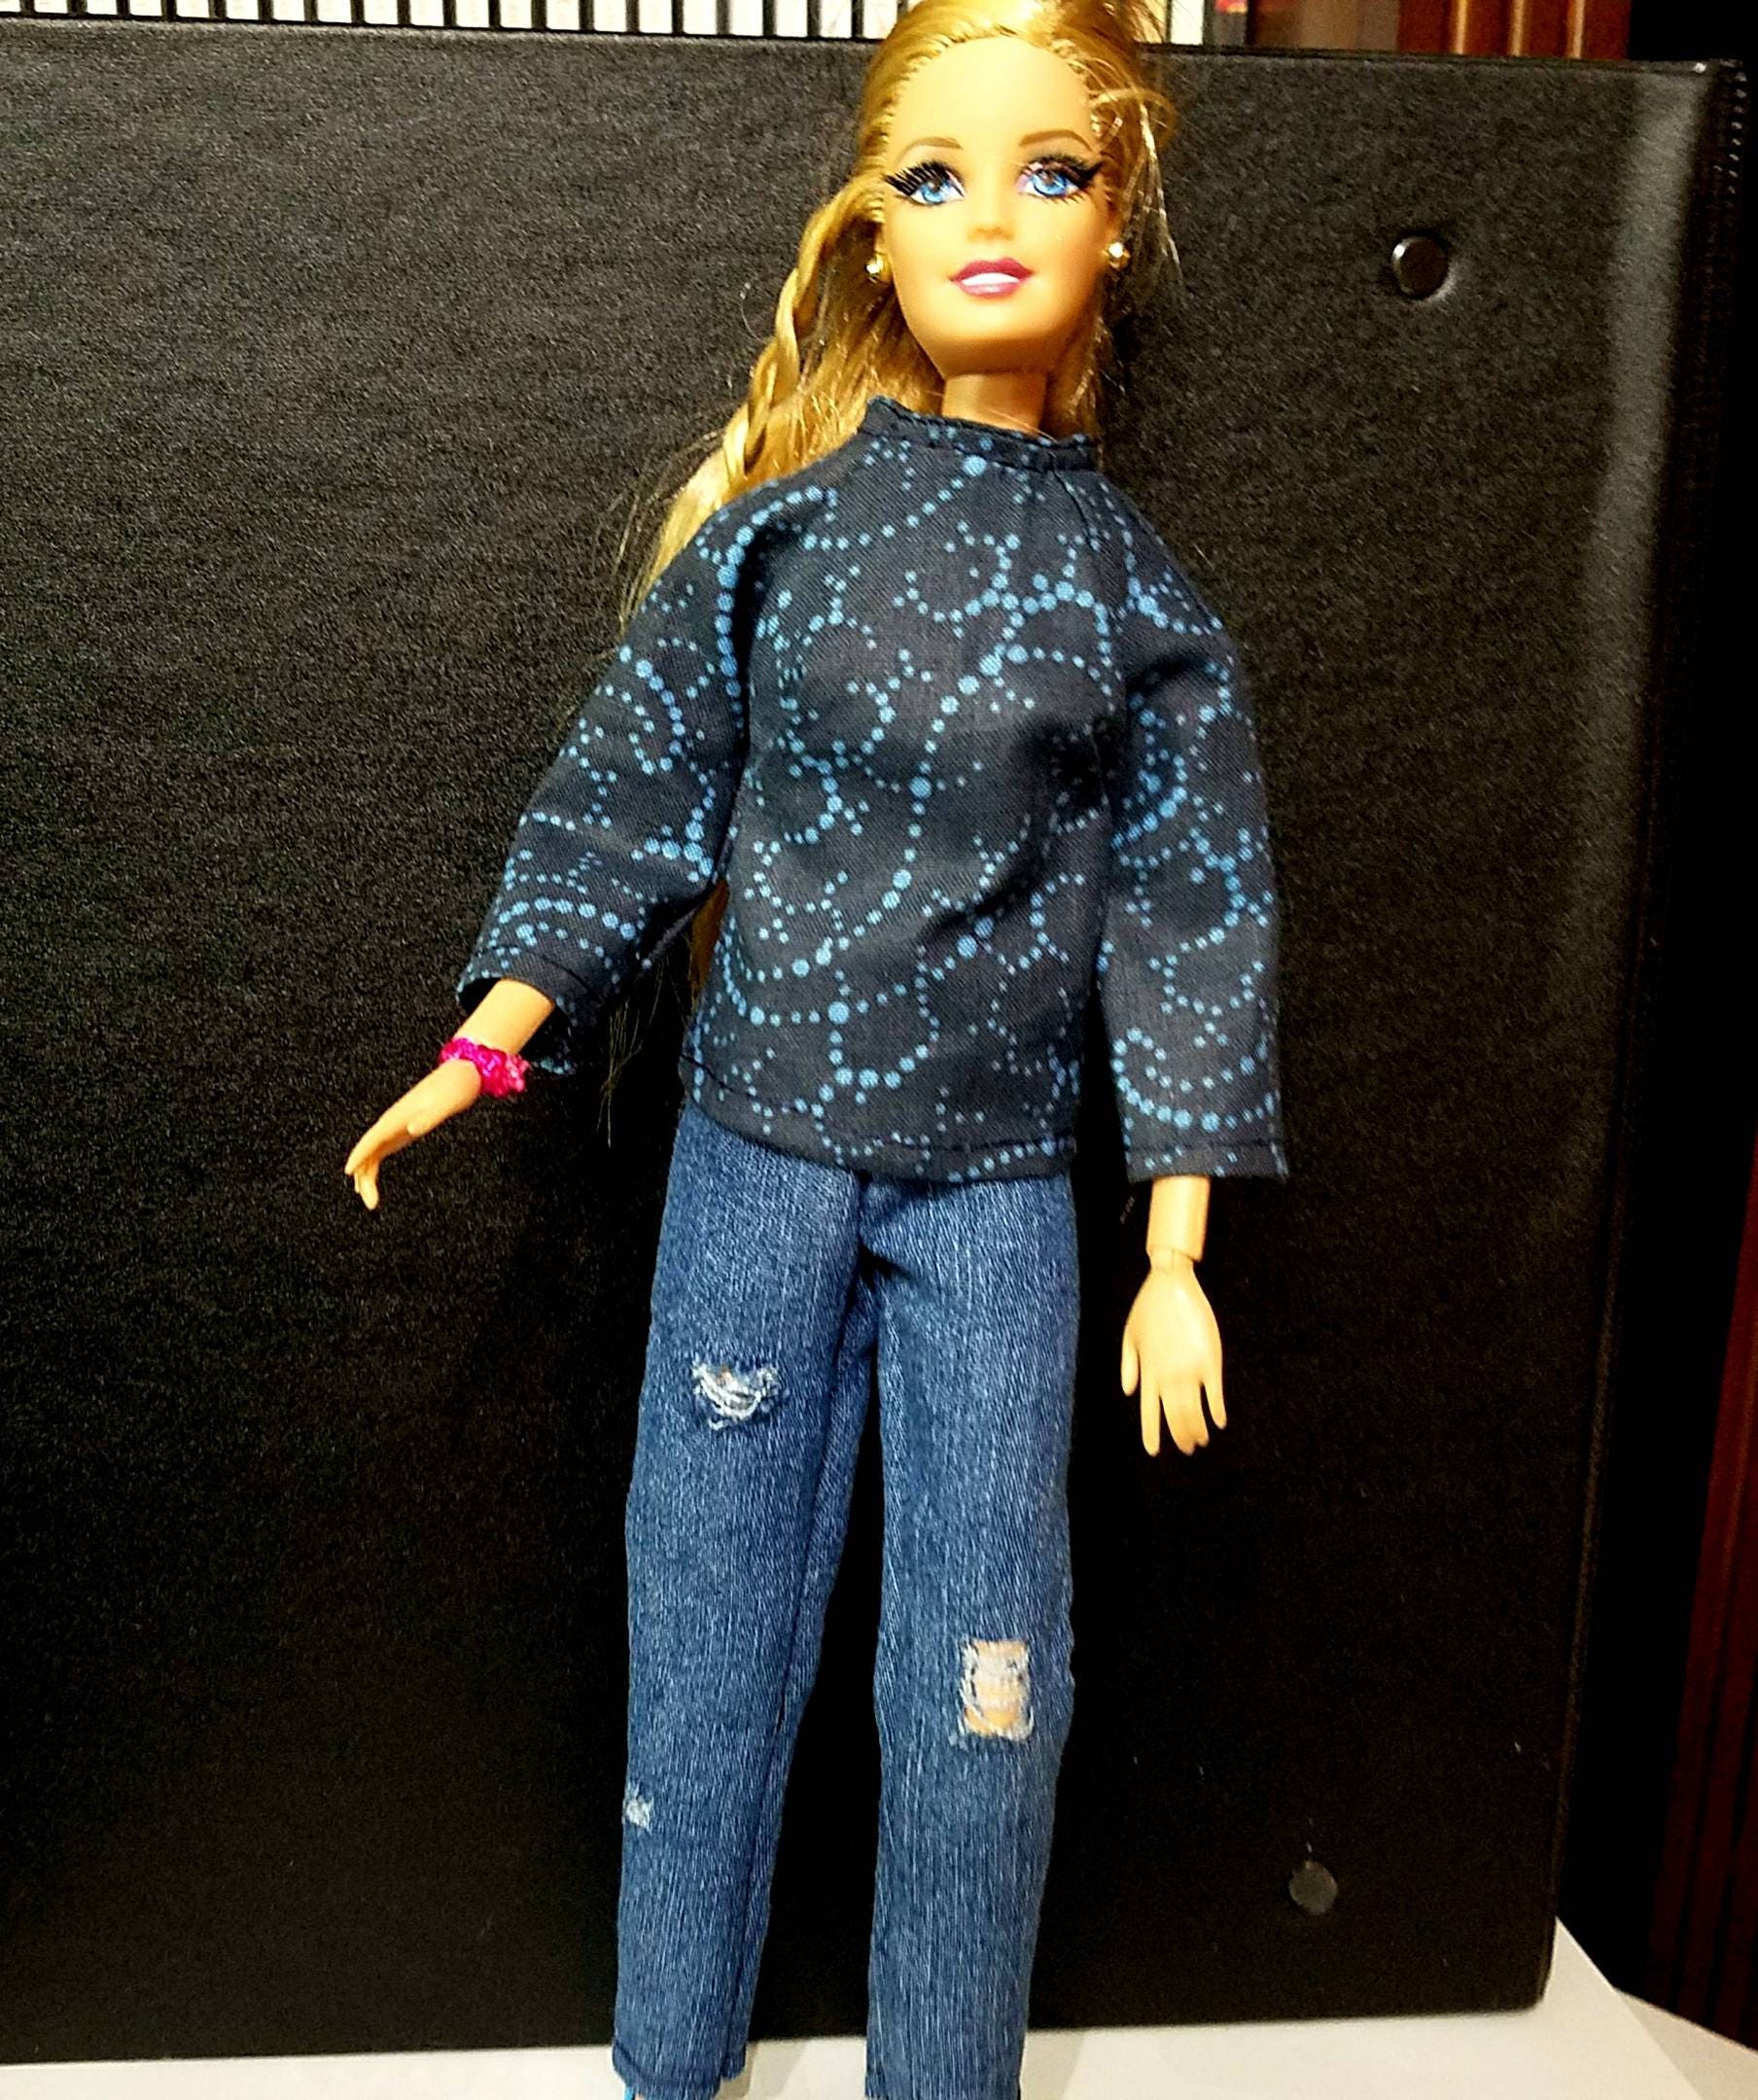 Barbie Doll Jeans Ripped Jeans blouse Shirt Barbie